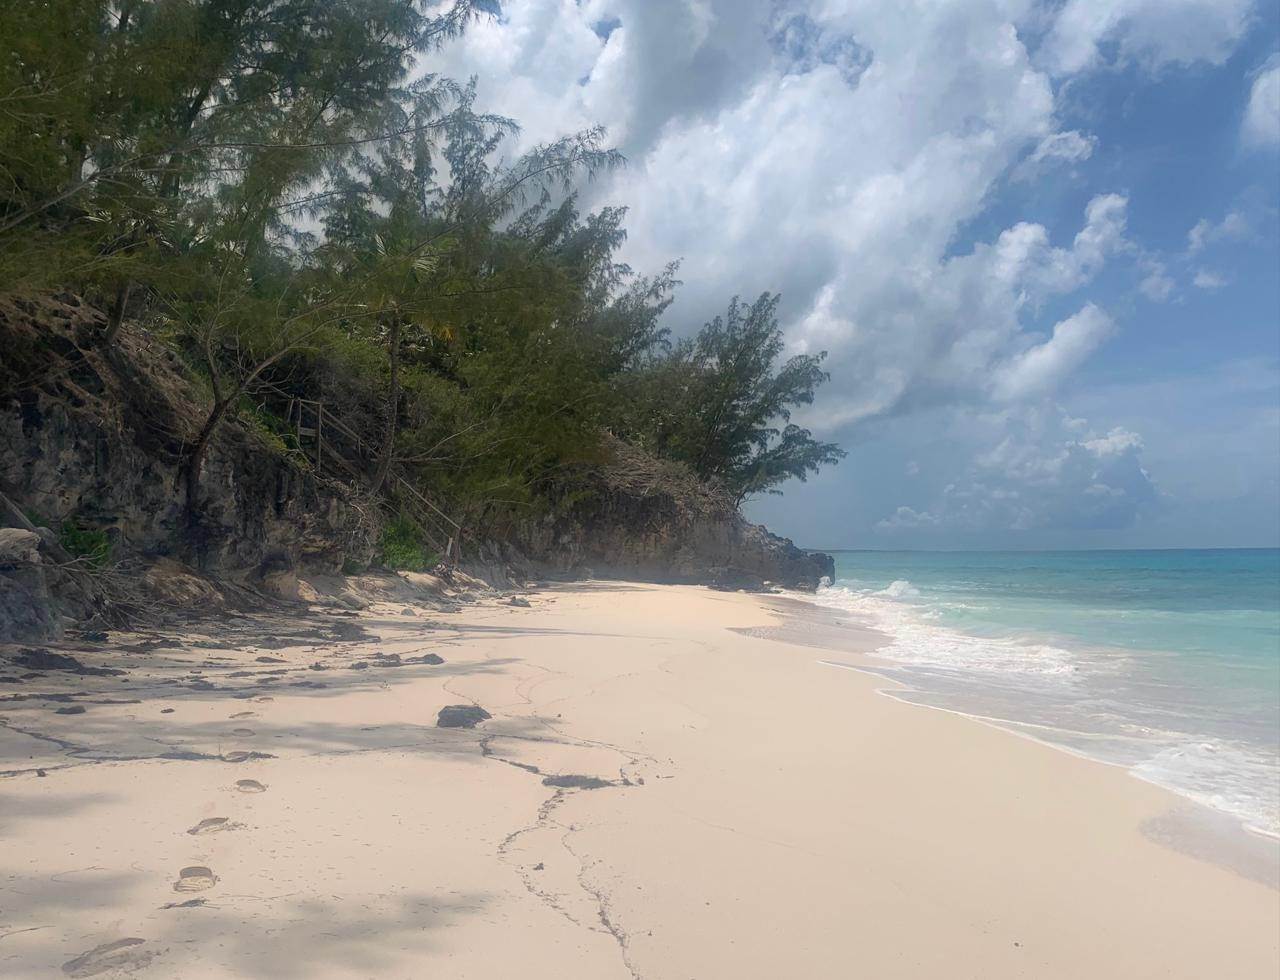 11. Lots / Acreage for Sale at Banks Road, Governors Harbour, Eleuthera, Bahamas